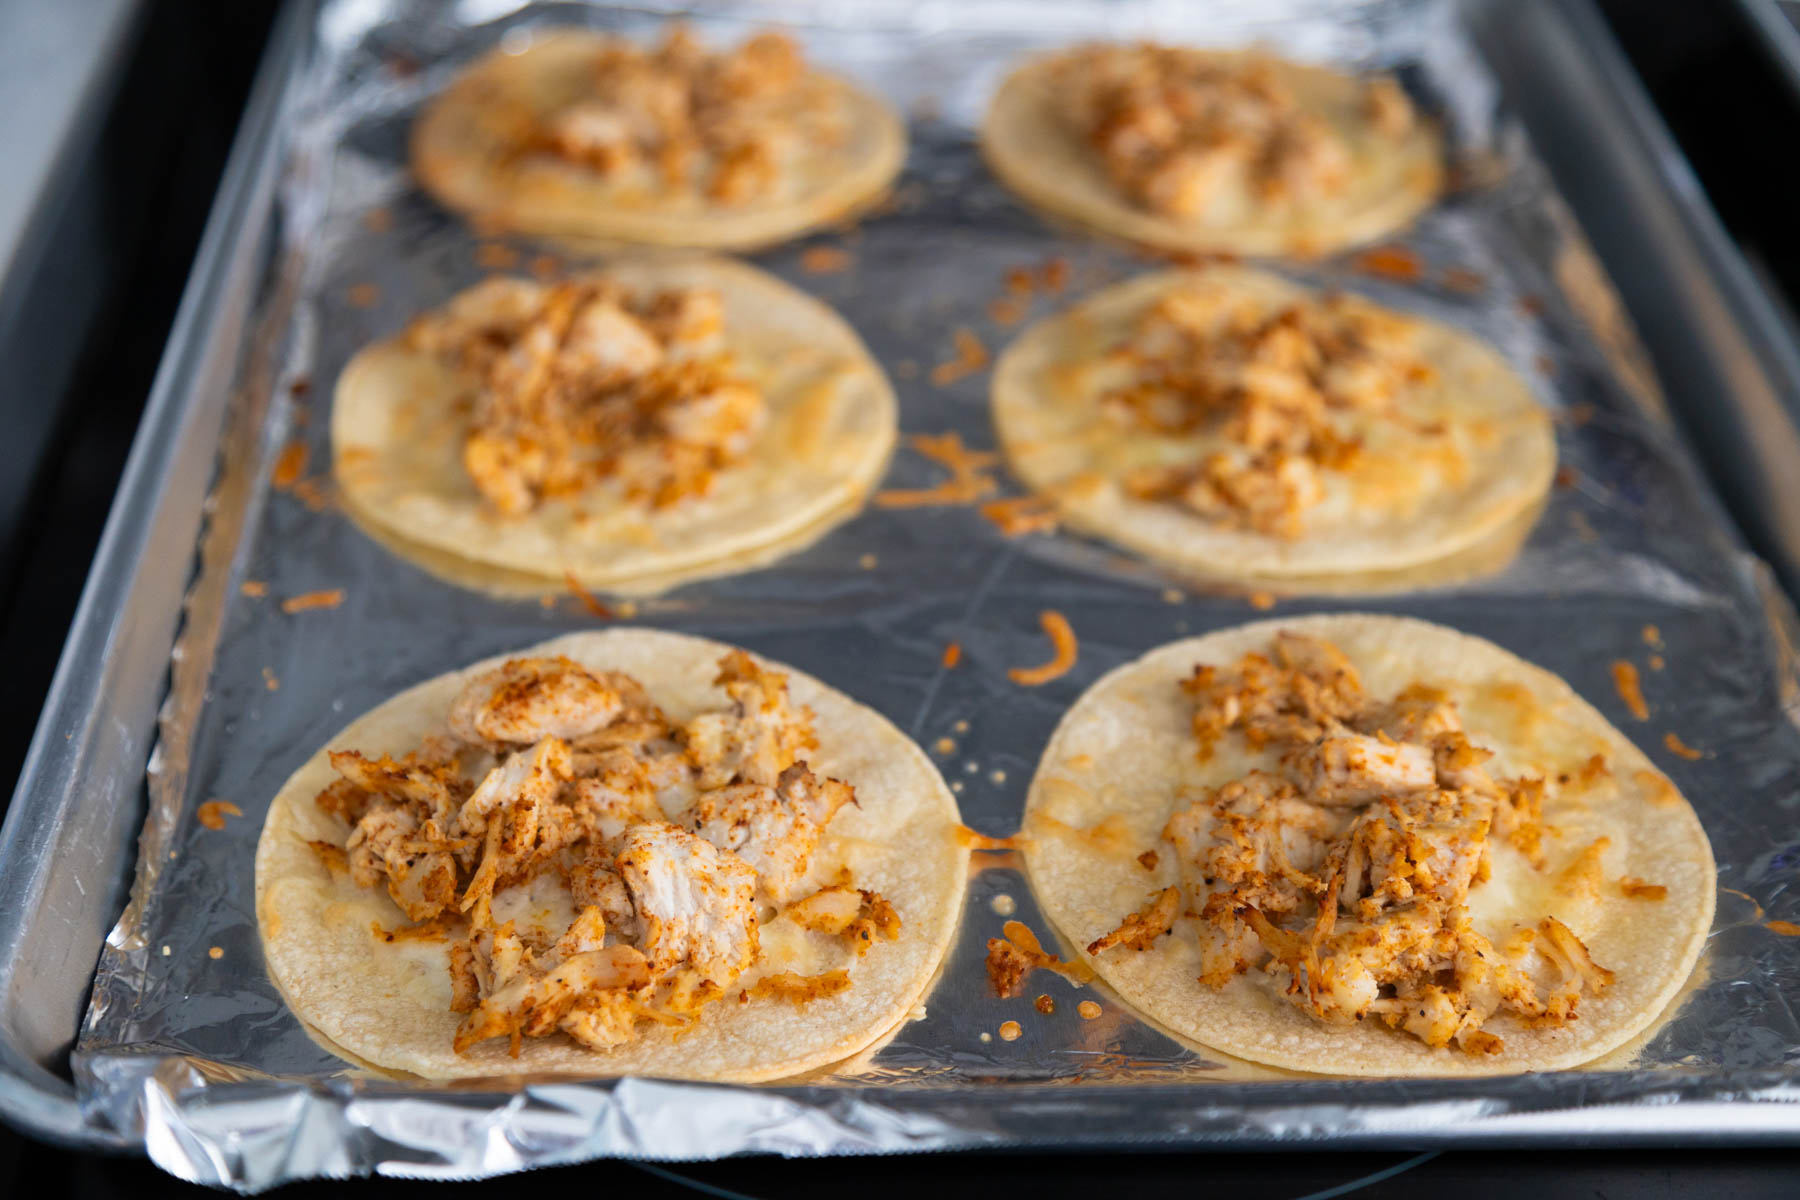 The chicken tacos have just come out of the oven, they are golden brown and the taco shells have slightly puffed up.